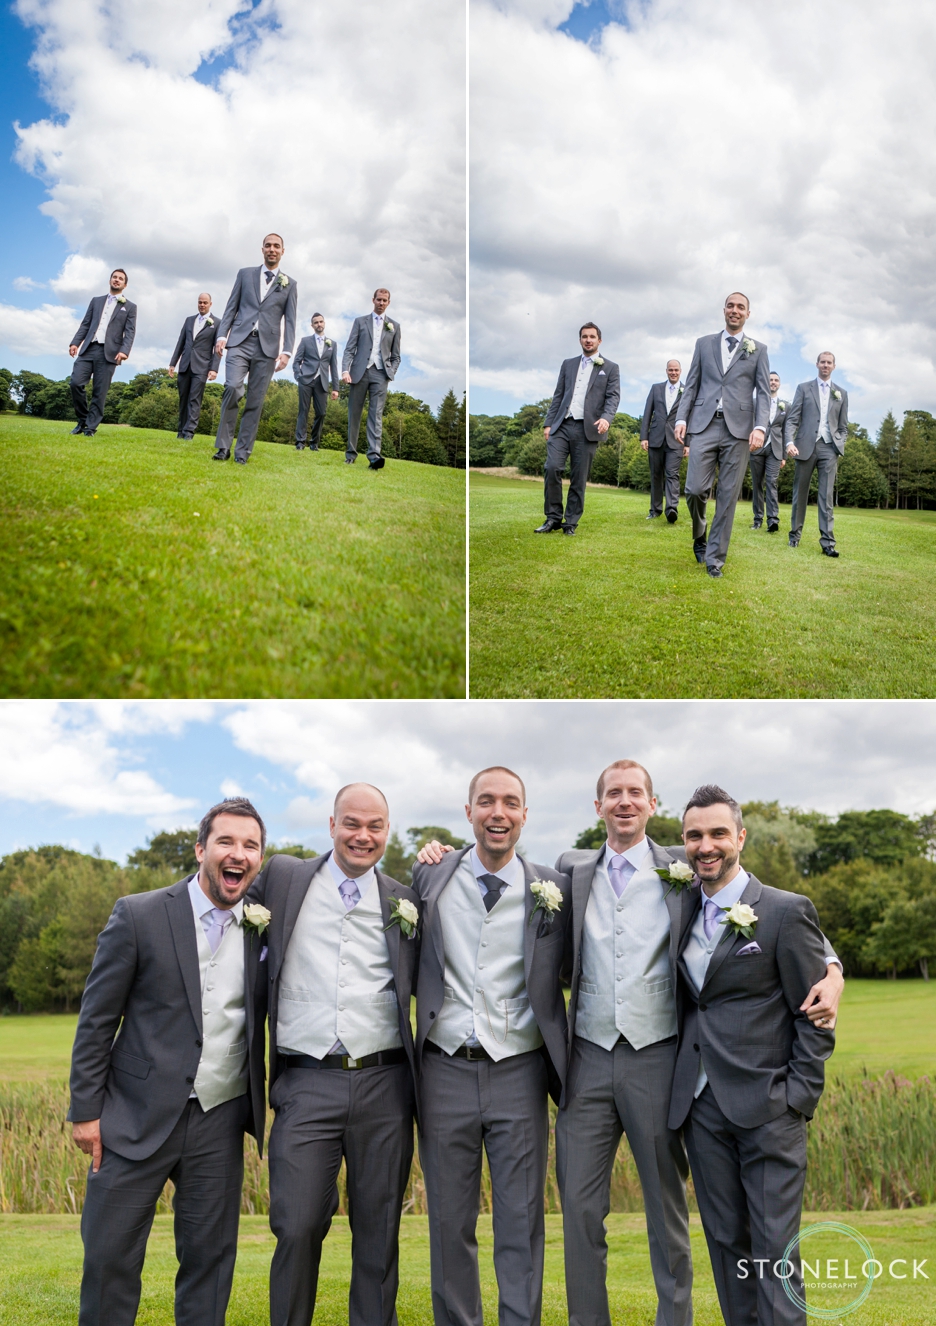 The groom and his groomsmen before the wedding